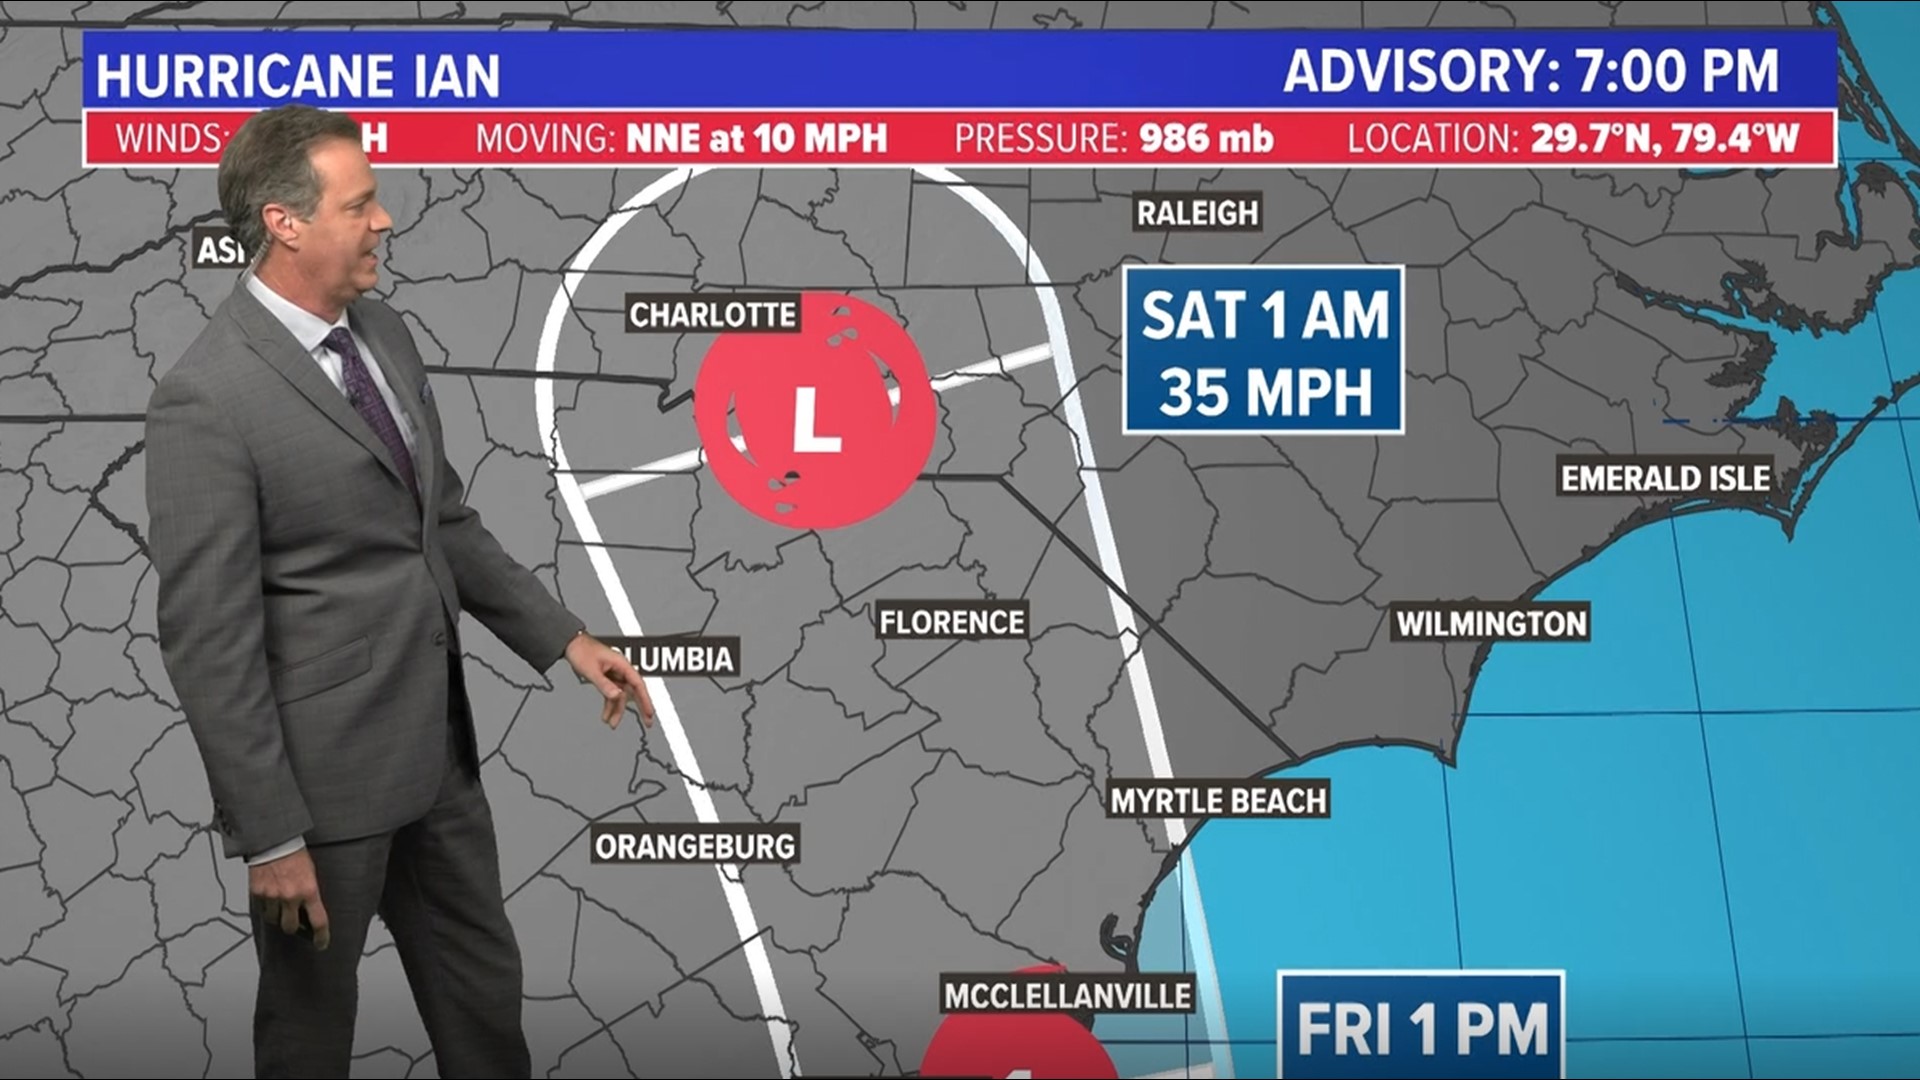 Ian spent less than 12 hours as a tropical storm before regaining strength as a Category 1 hurricane. It's on track to make landfall in Charleston as early as Friday